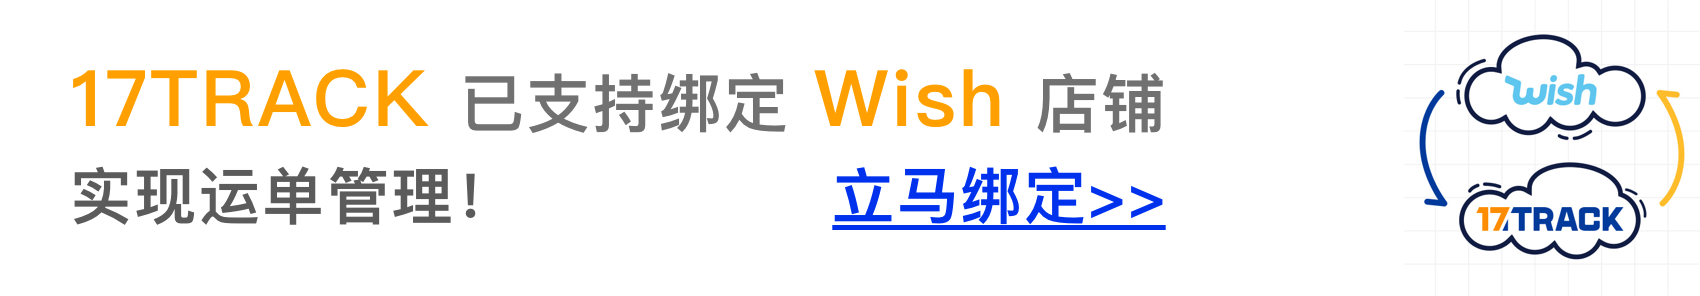 17TRACK__wish__.png